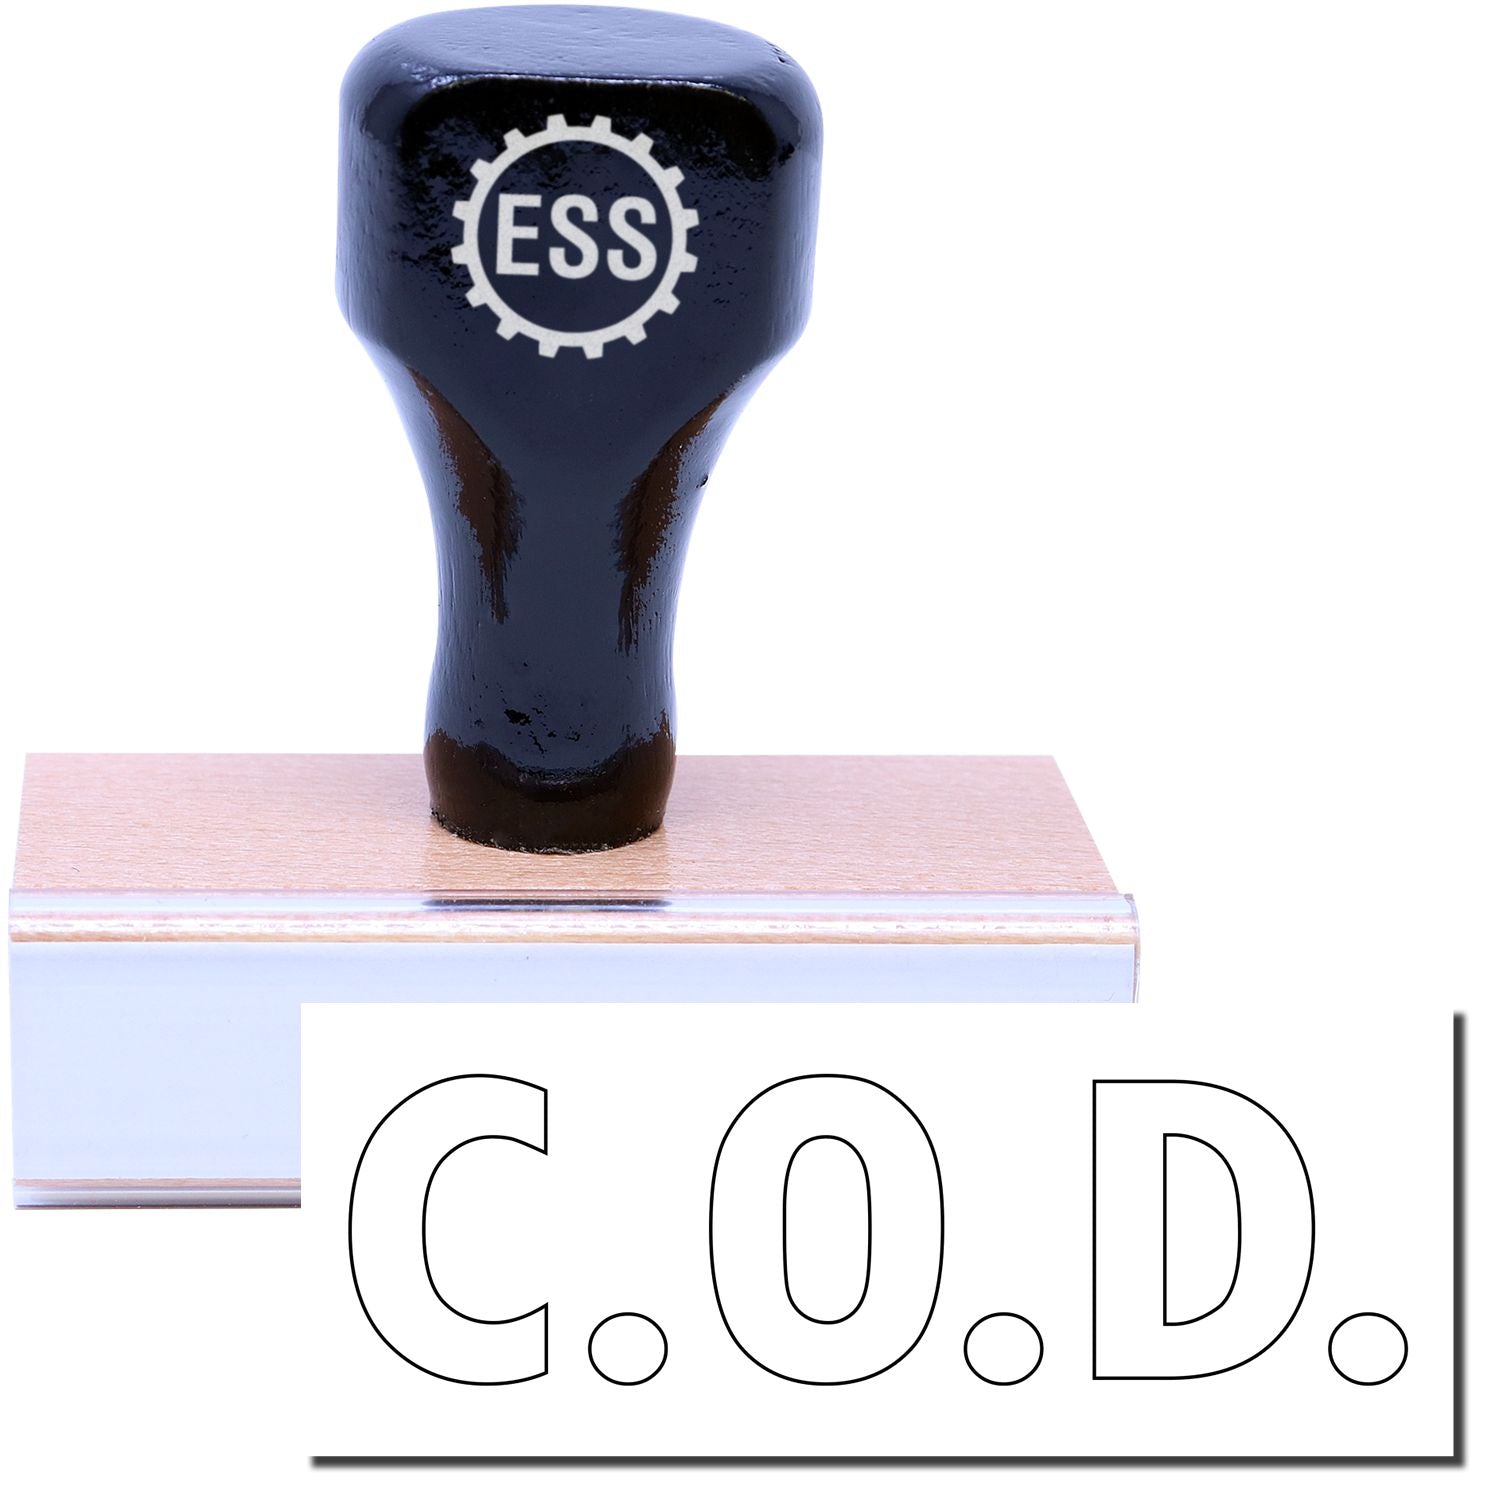 A stock office rubber stamp with a stamped image showing how the text "C.O.D." in a large font and in outline style is displayed after stamping.